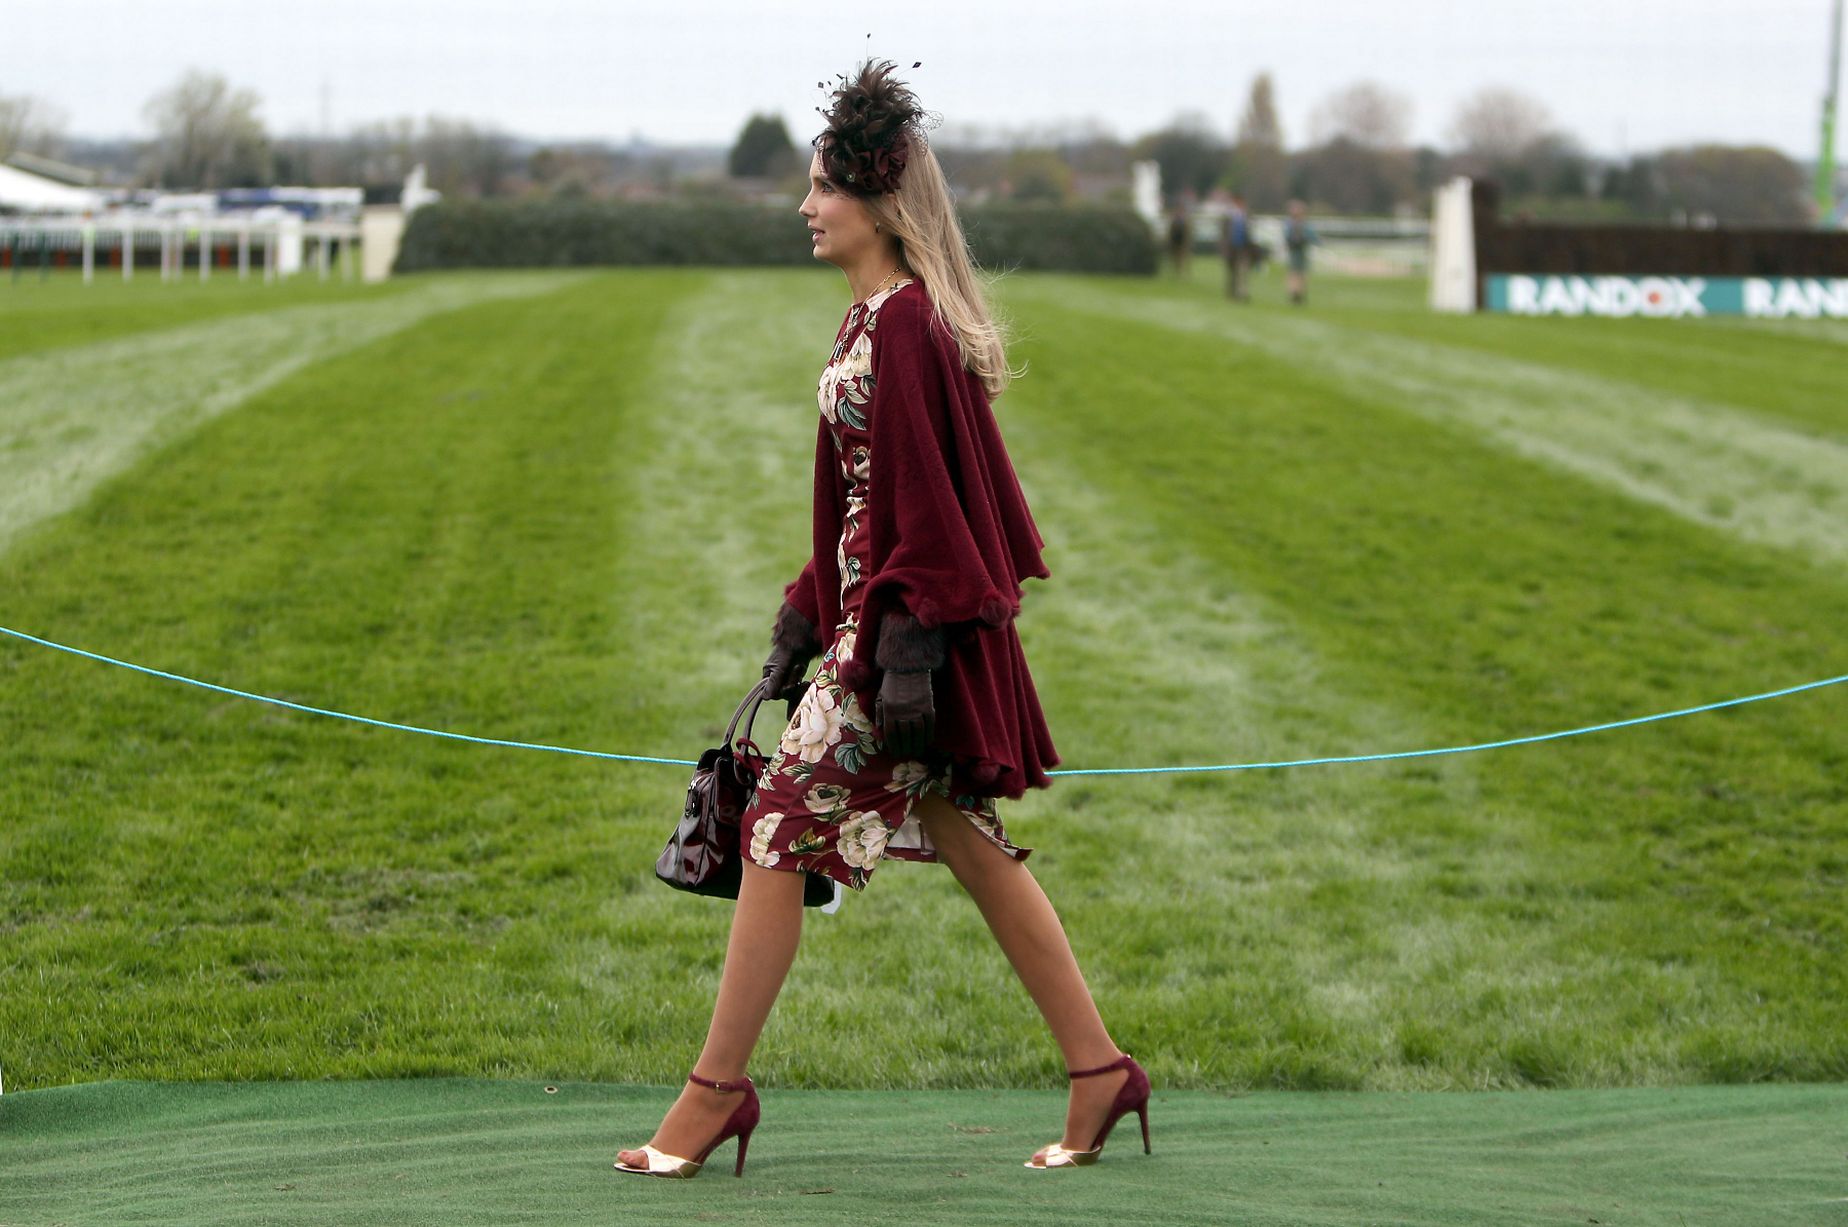 All Up For Aintree Ladies? Grand National 2018.